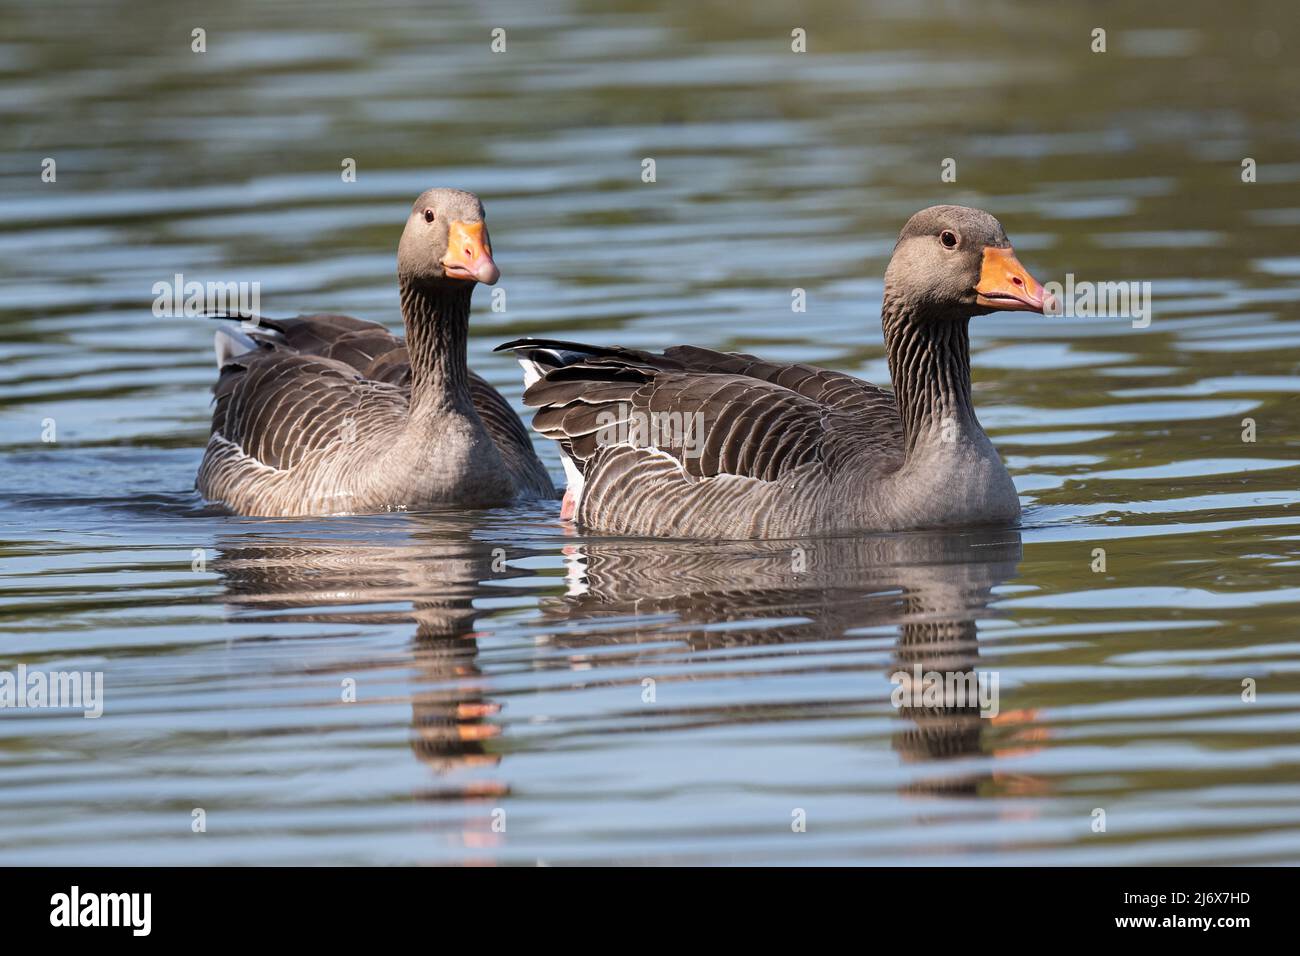 Pair of greylag geese swimming in a pond Stock Photo